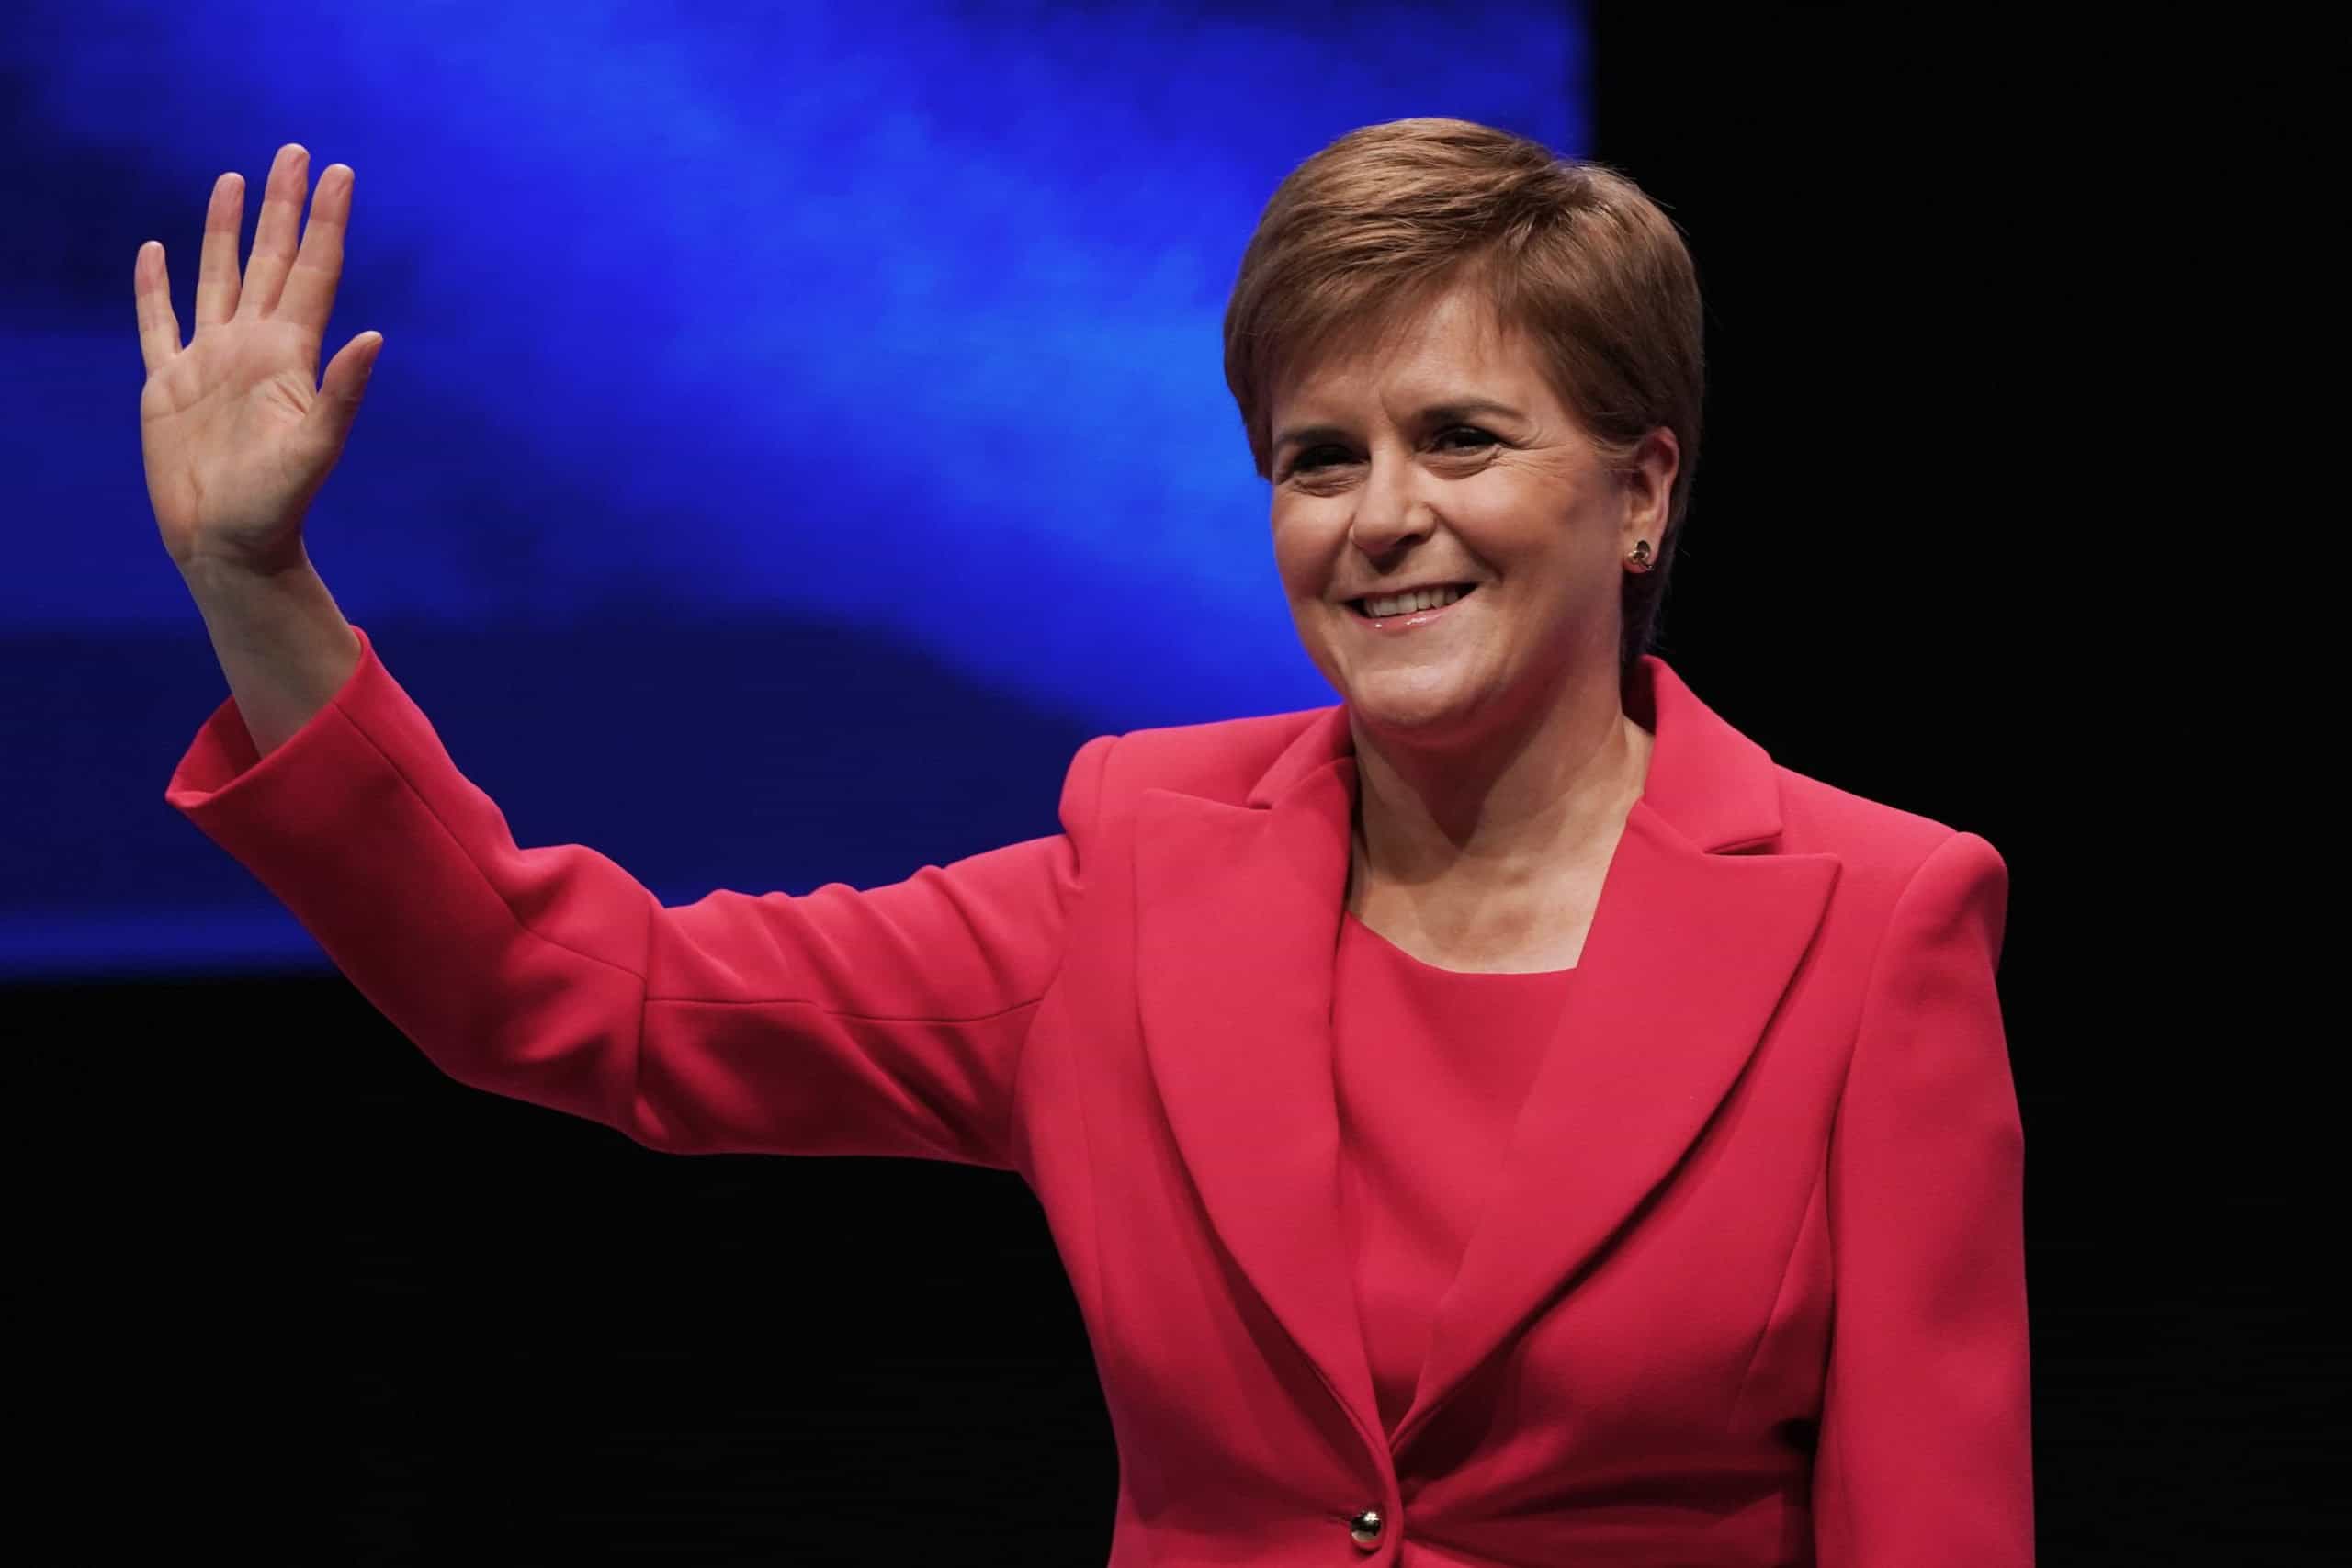 Tributes pour in for Nicola Sturgeon as she resigns as first minister